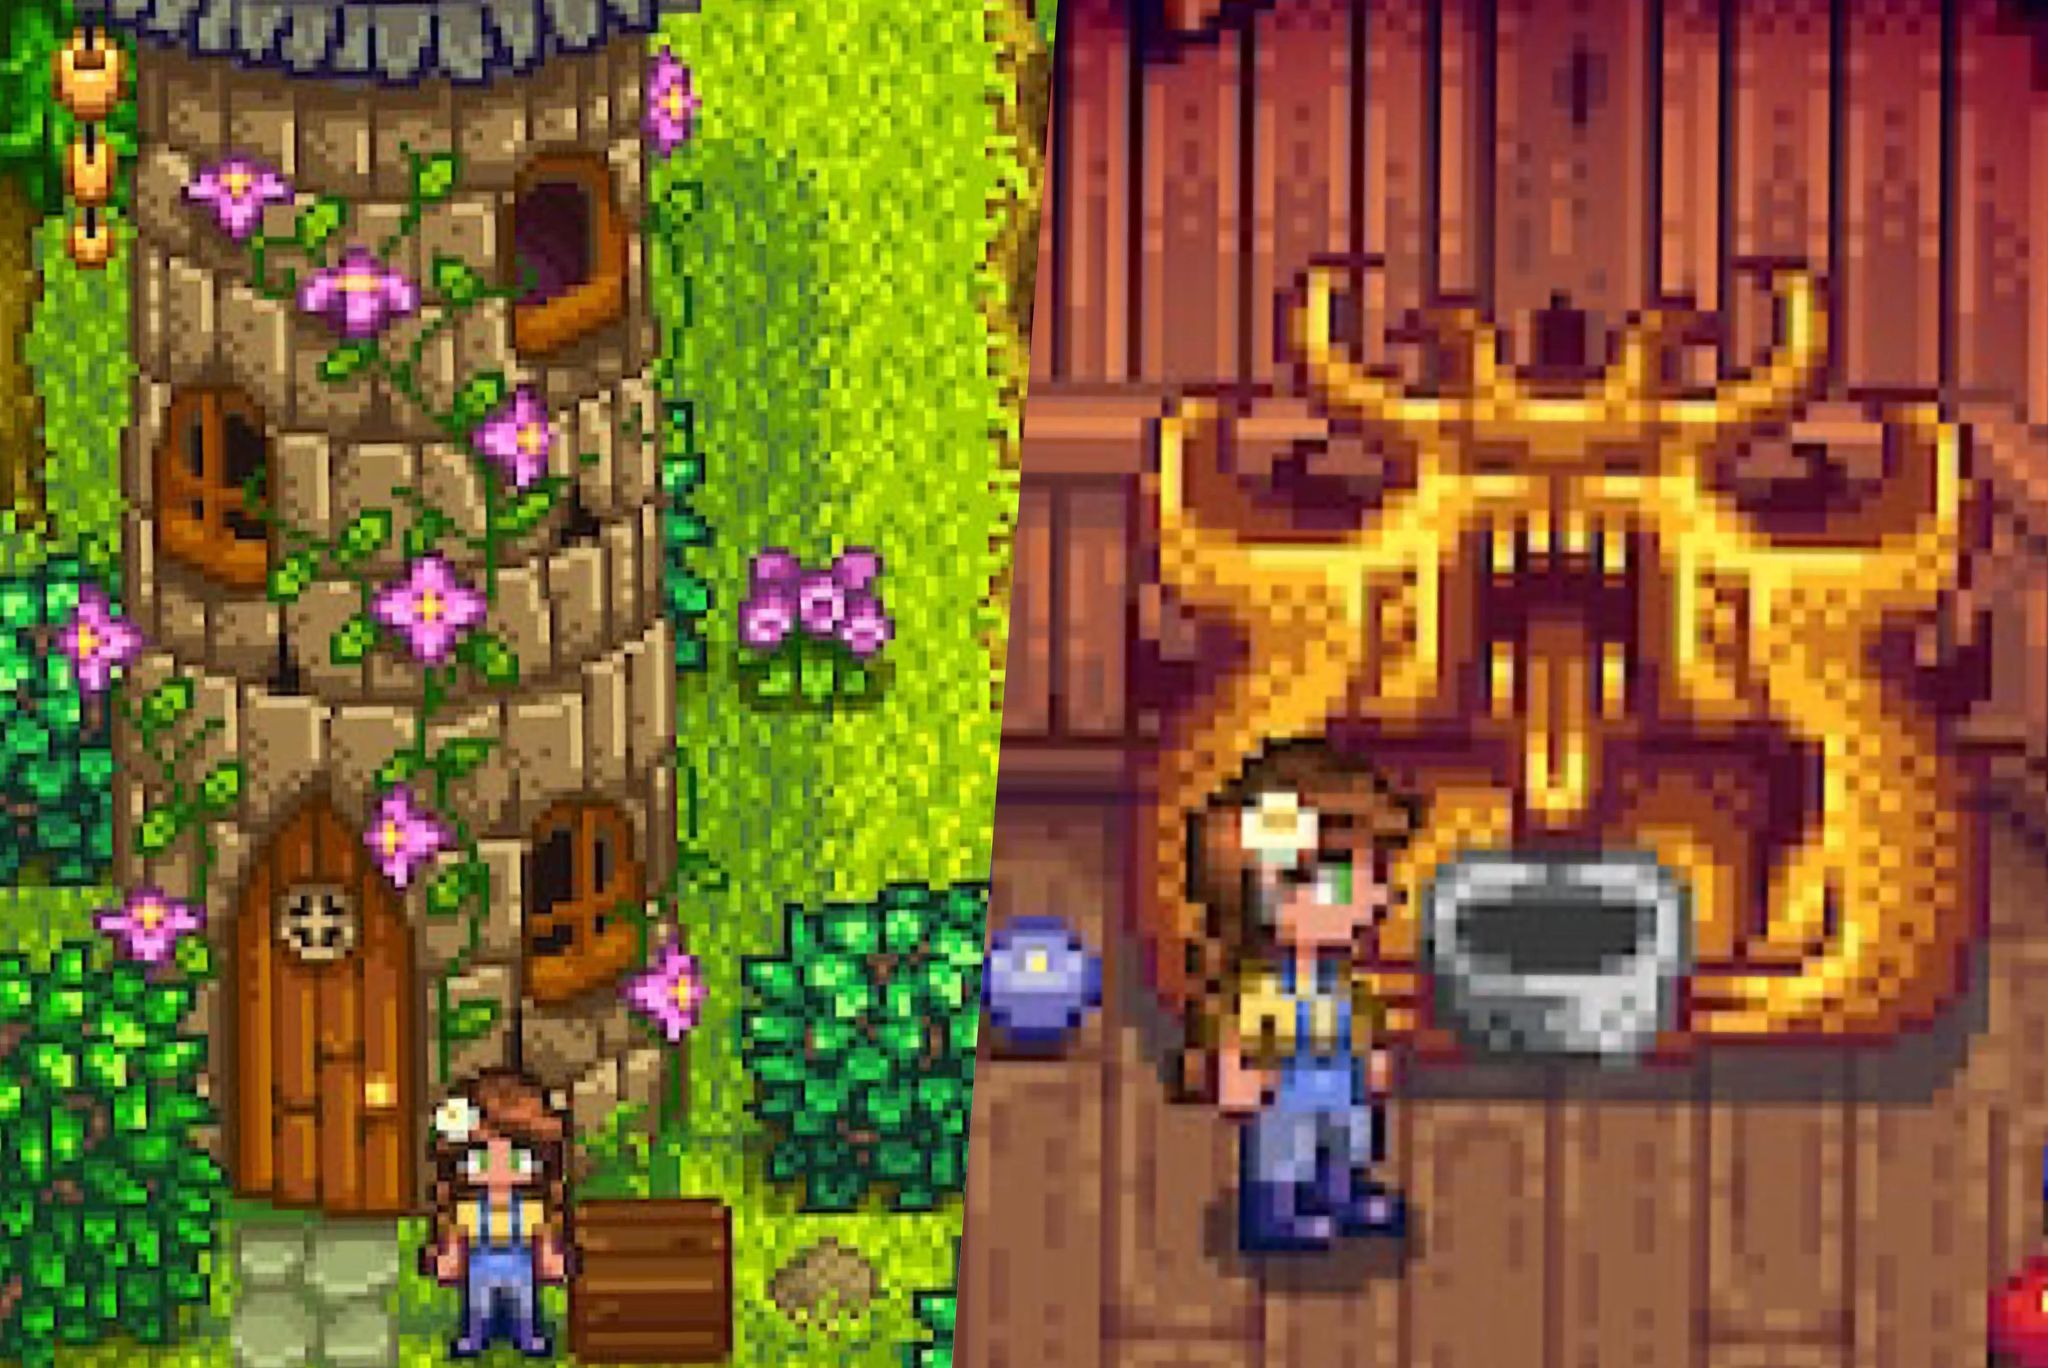 Stardew Valley: How to Change Your Appearance - wide 2